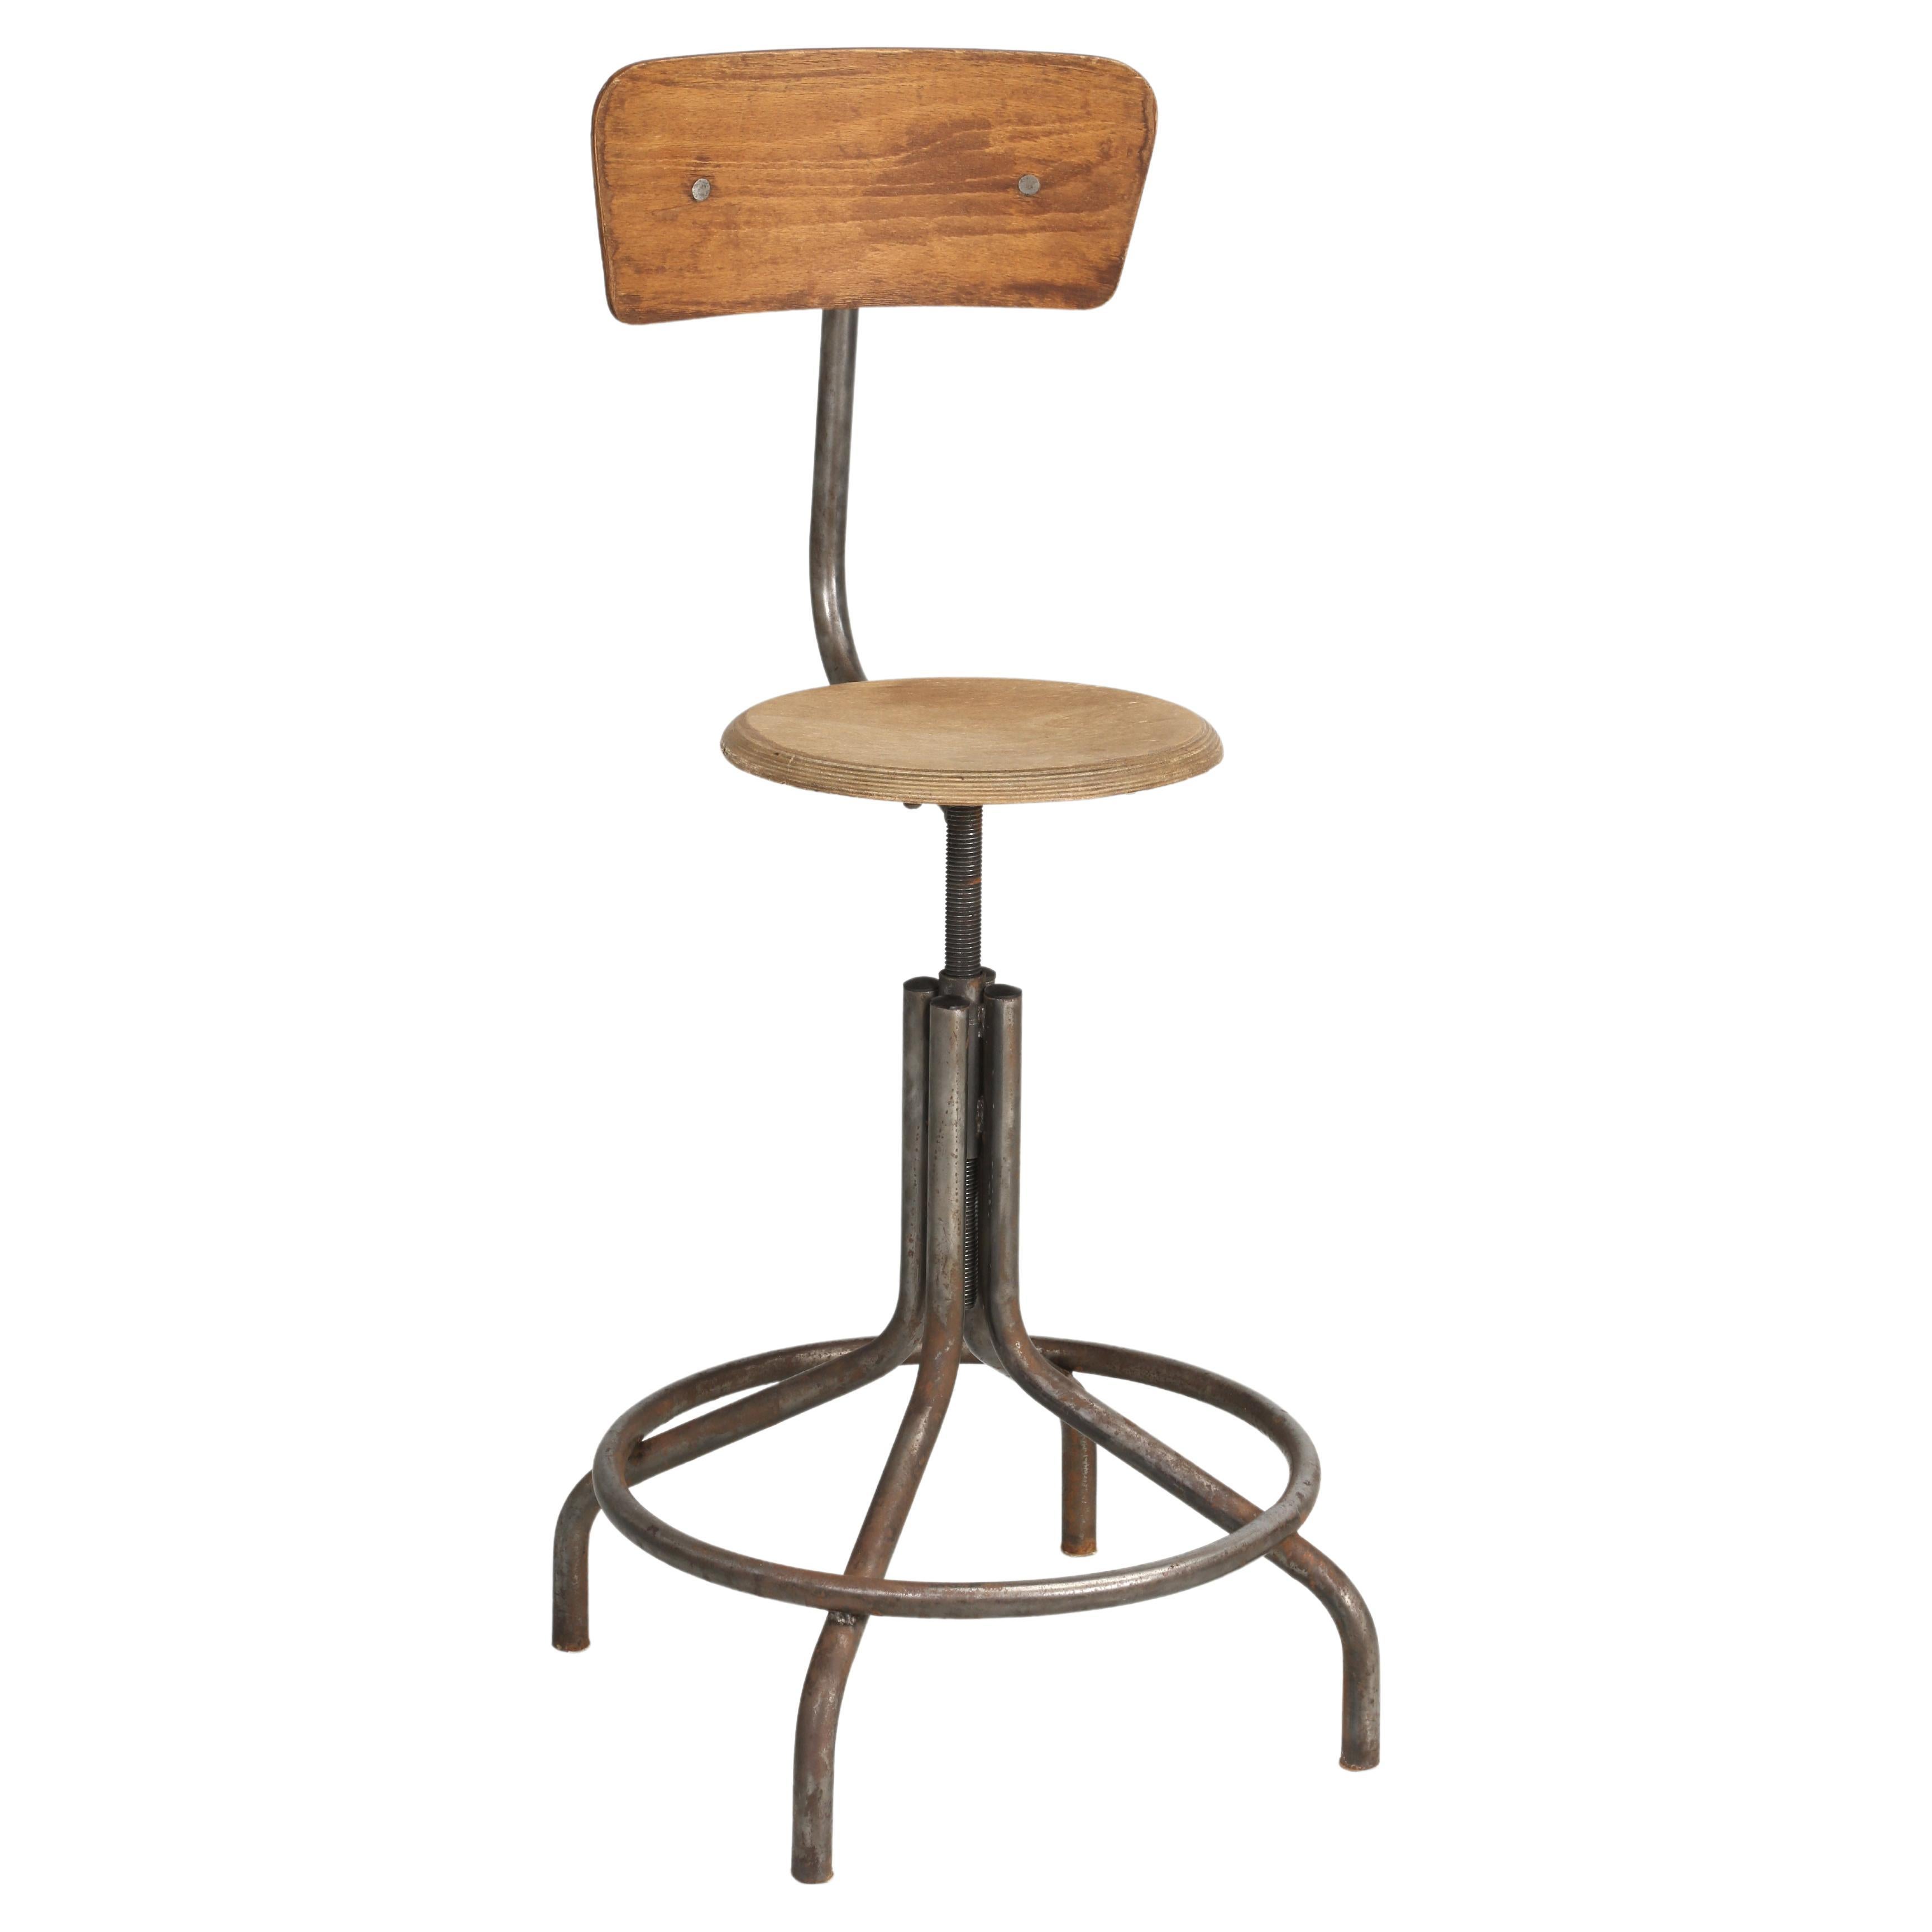 Industrial Machine-Age Adjustable Shop or Office Stool Unusually Comfortable